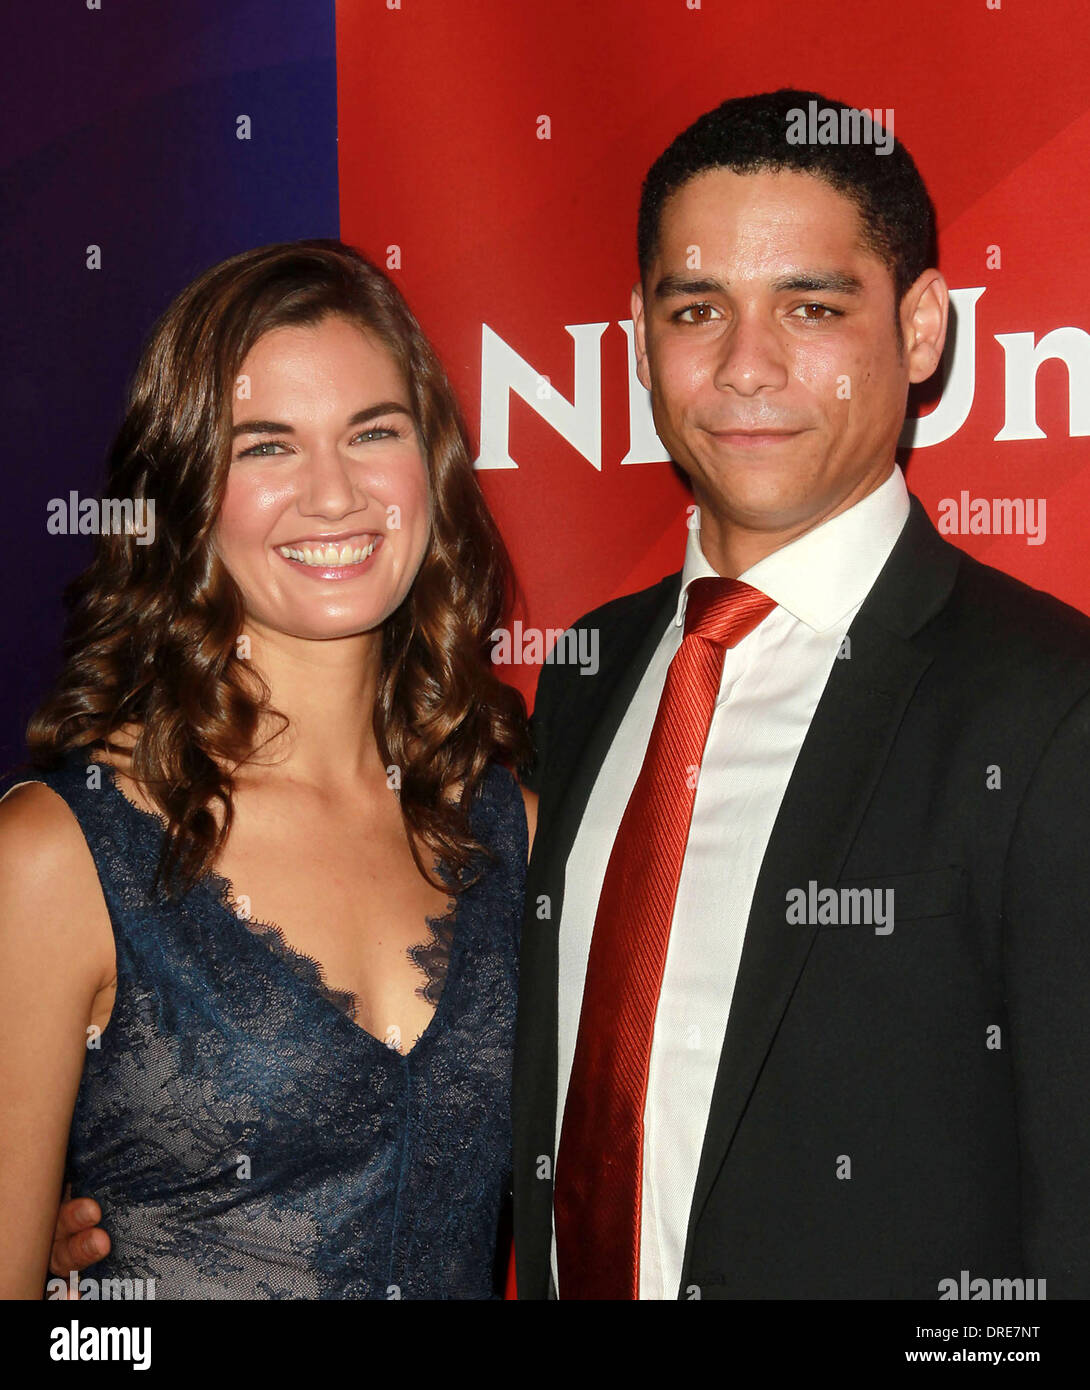 Teri Reeves And Charlie Barnett Nbc Universal Press Tour At Beverly Hilton Hotel Beverly Hills California 24 07 12 Stock Photo Alamy